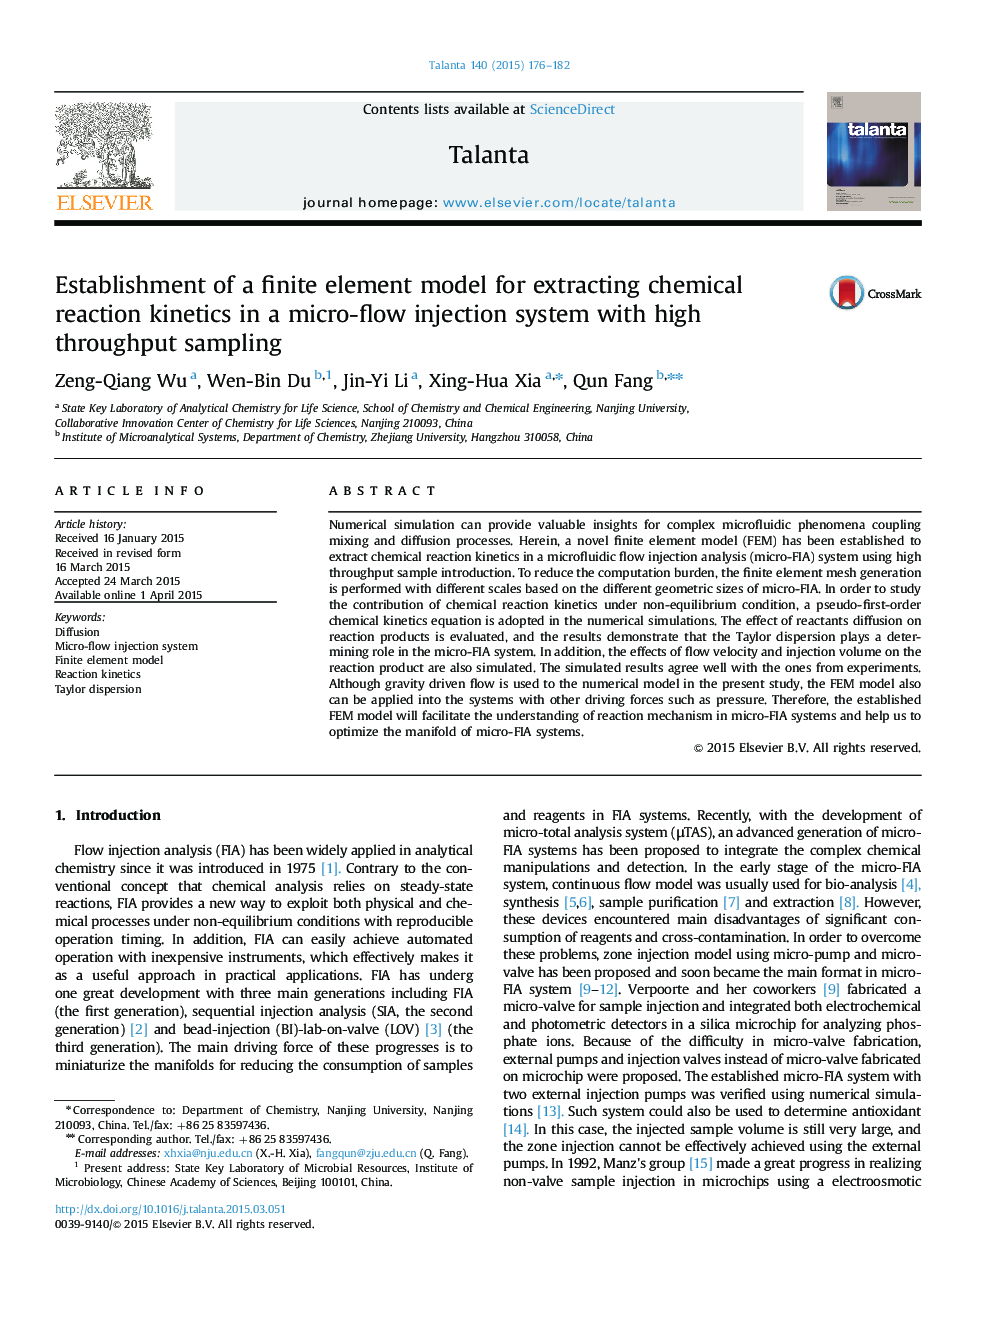 Establishment of a finite element model for extracting chemical reaction kinetics in a micro-flow injection system with high throughput sampling